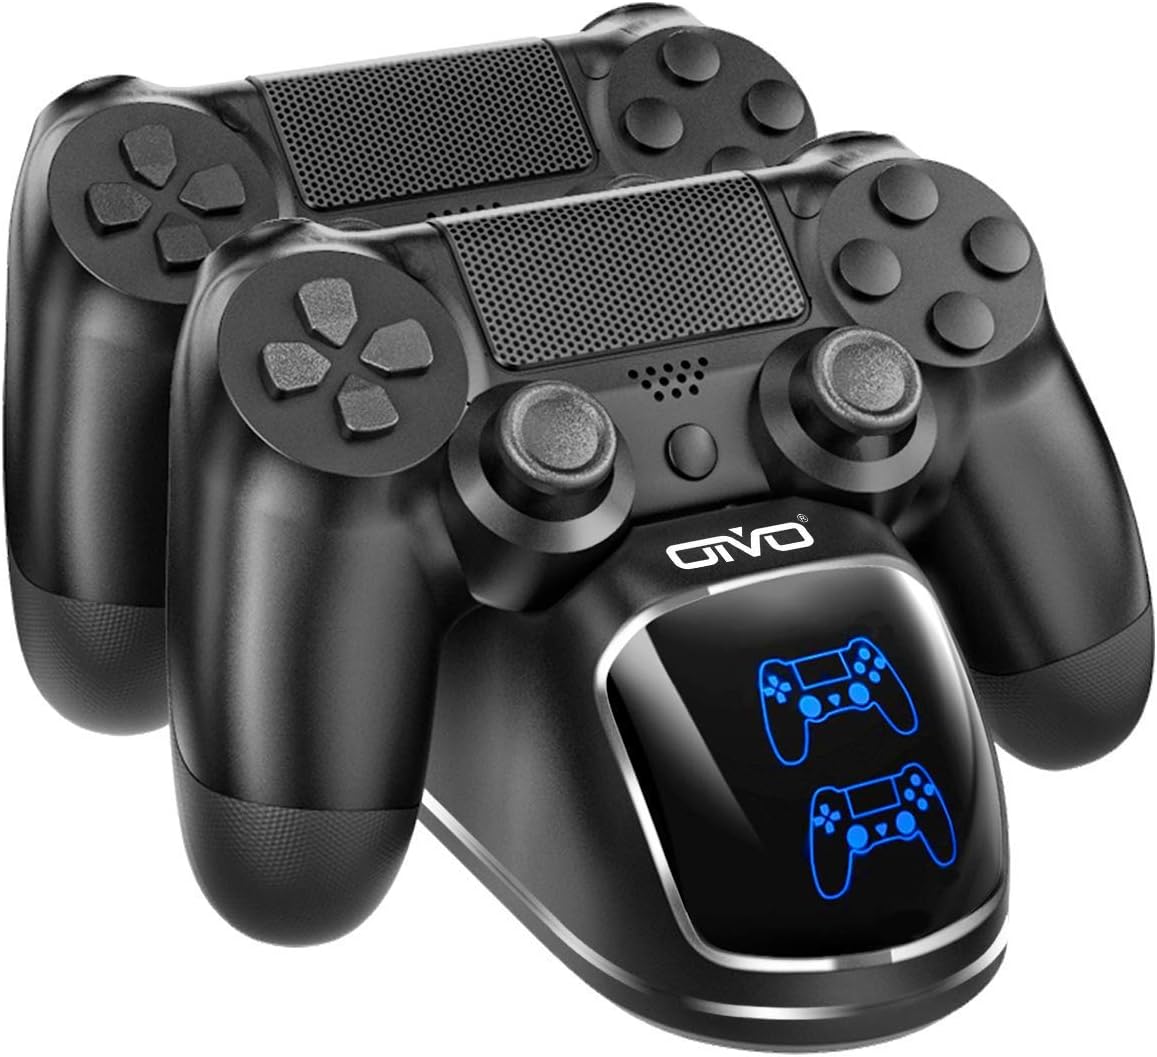 DOBE Dual Shock 4 Charging Docking Station for Sony Playstation 4 Controller